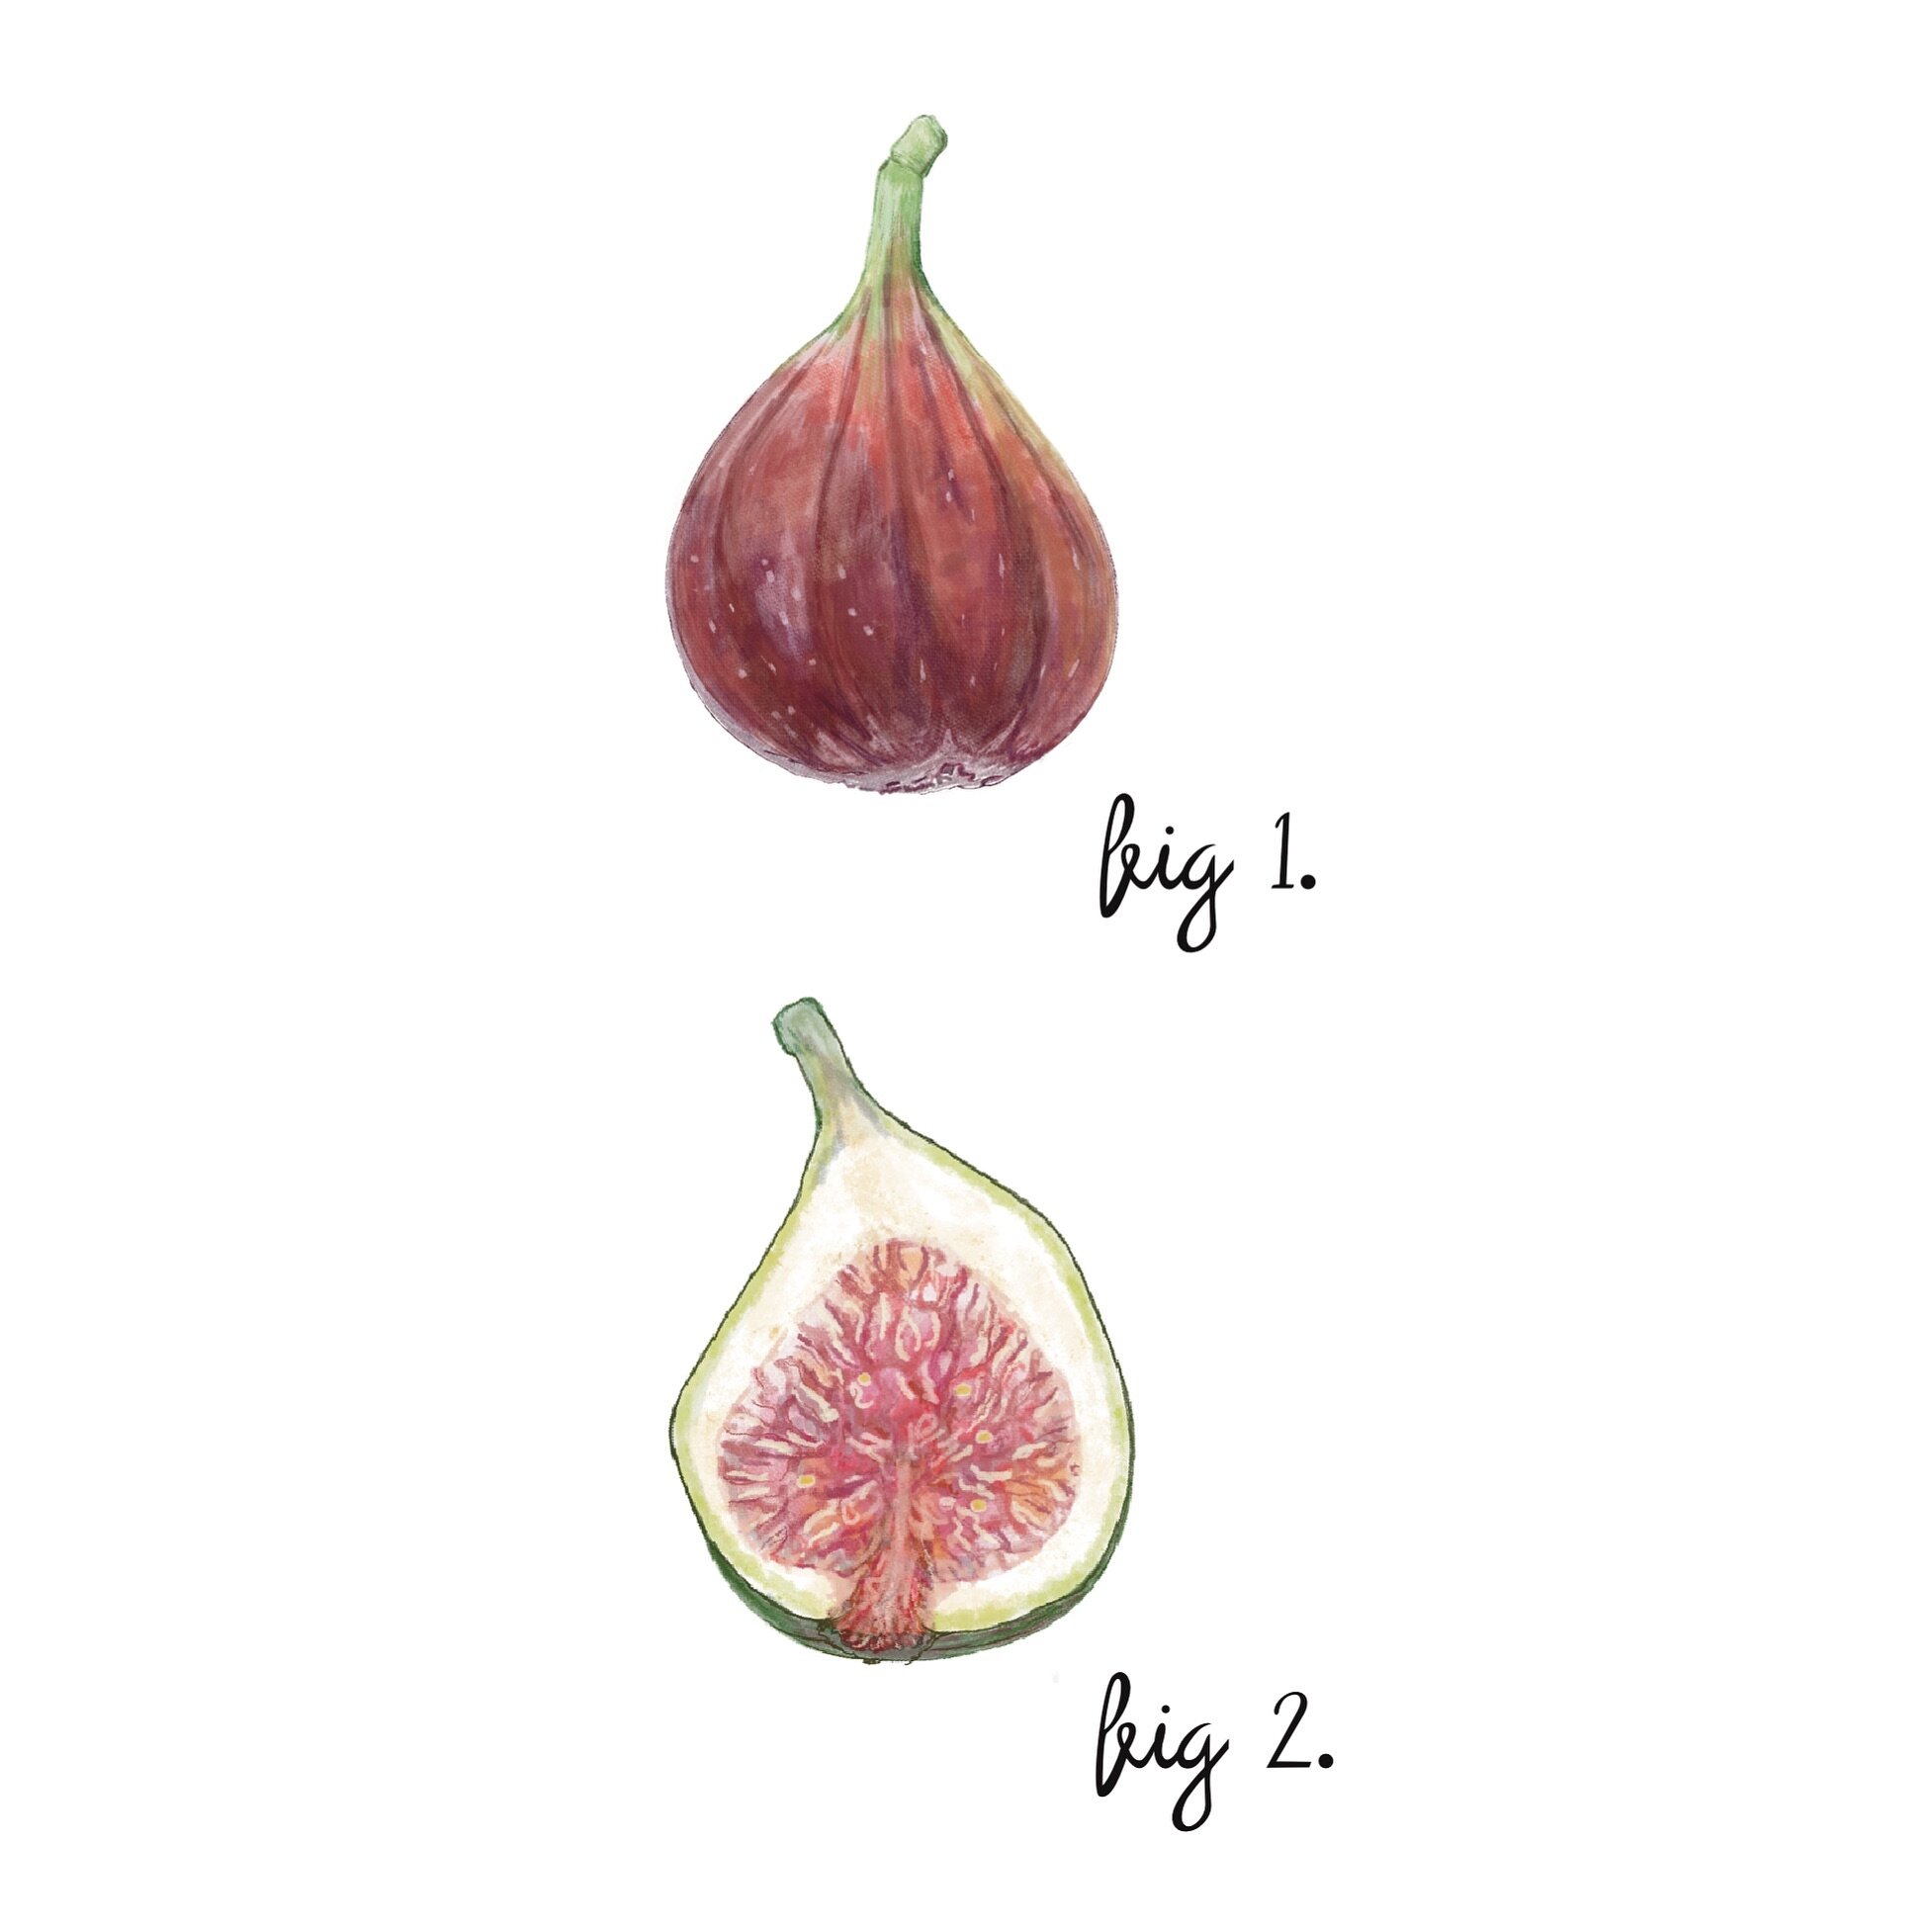 Ahhh, I do love fig season. 

And I do love the scent of a fig tree on a hot balmy night. 

So, to make sure I reach my fig consumption quota this year, I have made plans to go fig picking this weekend. I hope you still have plenty @willabrand  @glen